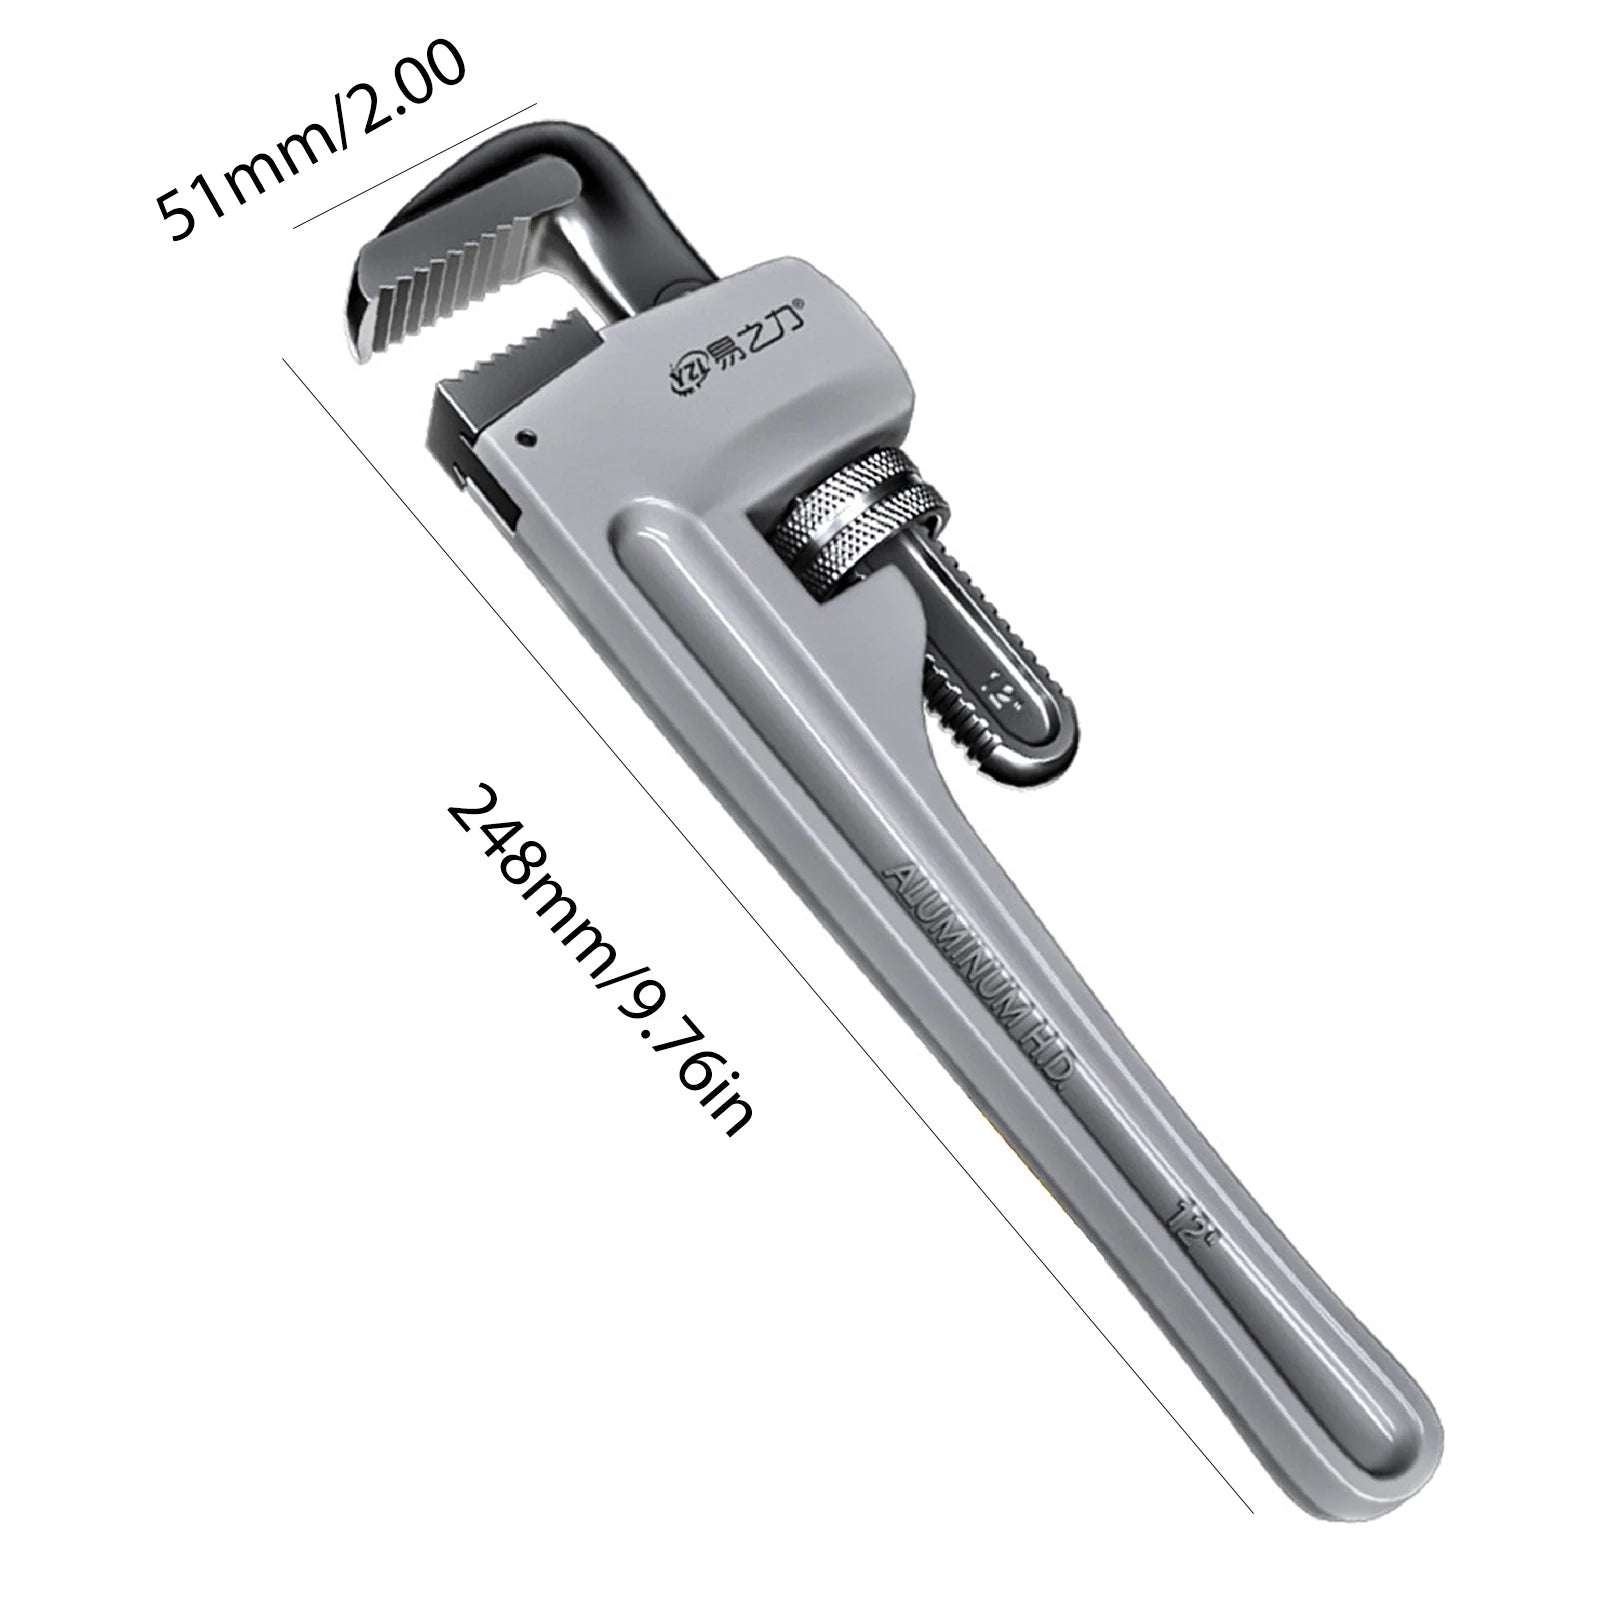 Aluminum Alloy Industrial Grade Pipe Wrench Household Universal Wrench Fast Dual-purpose Multi-functional Plumbing Pipe